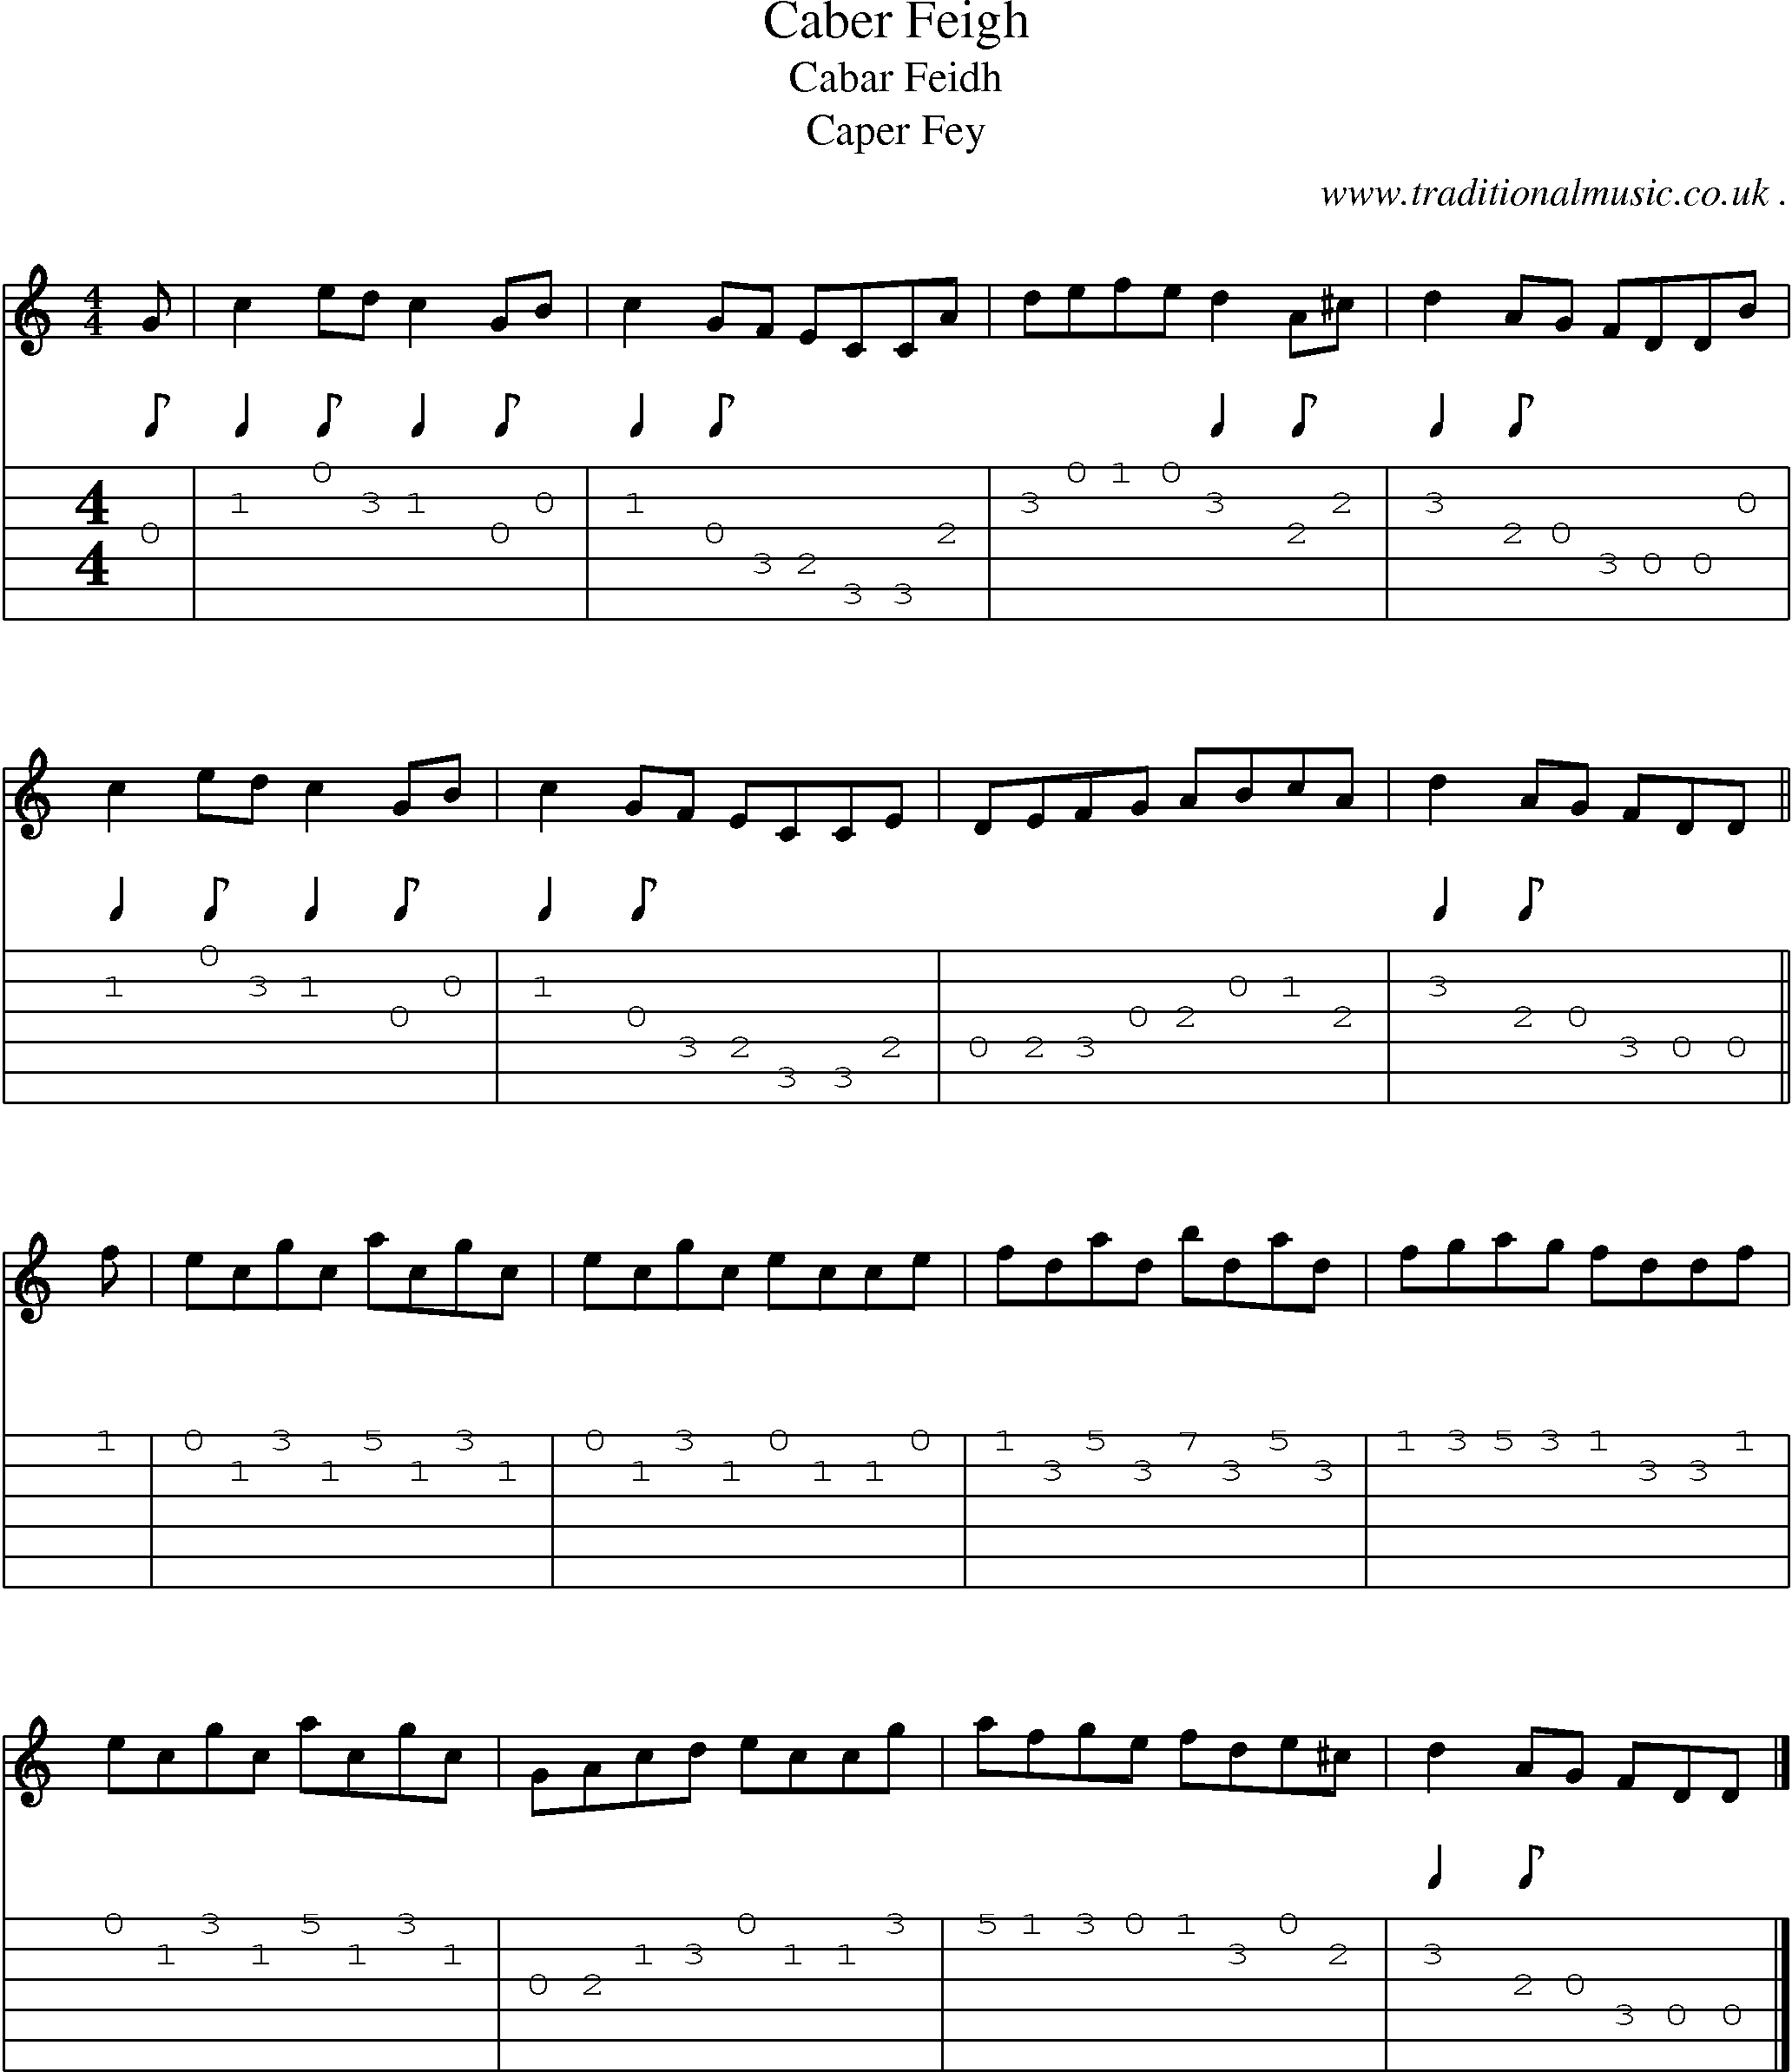 Sheet-music  score, Chords and Guitar Tabs for Caber Feigh